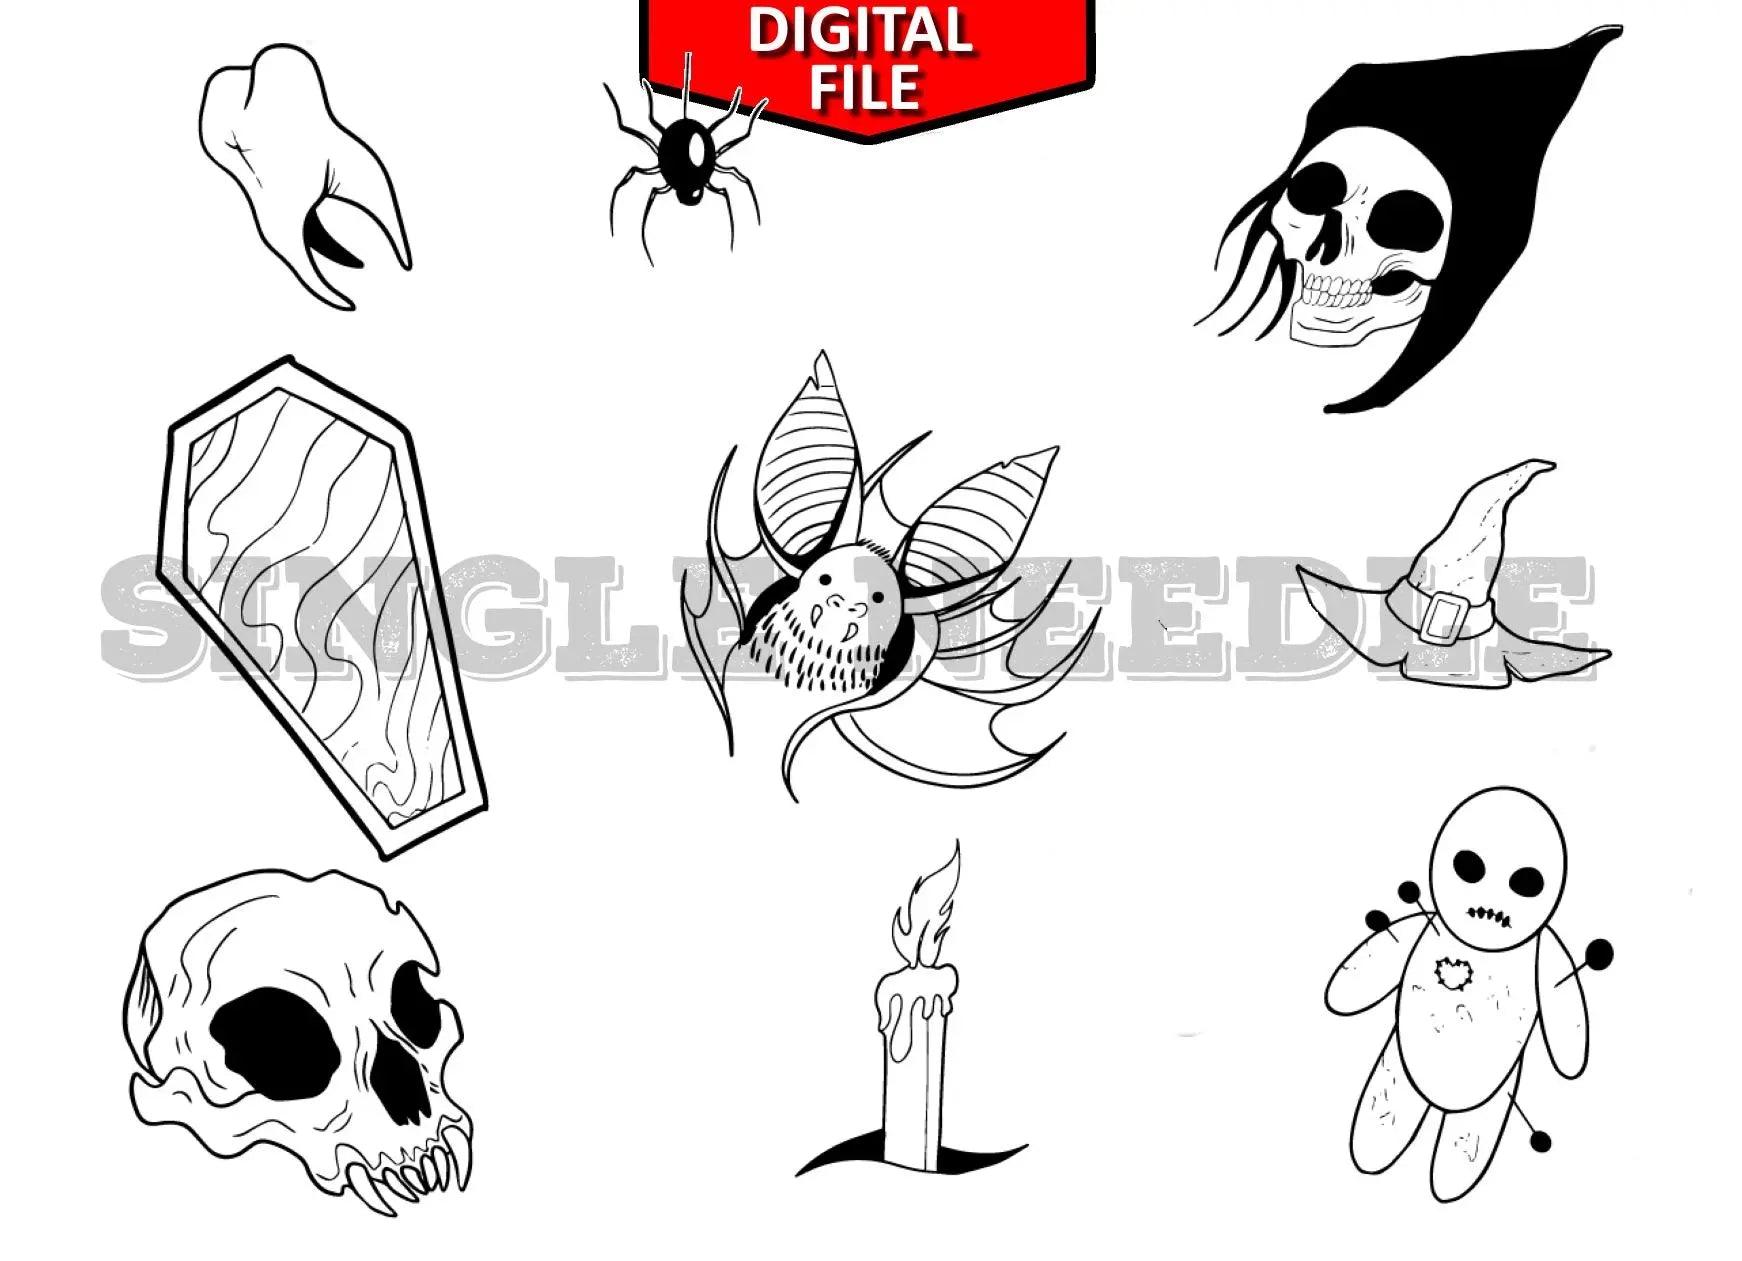 Festival Music Tattoo Flash Sheet Stencil for Real Stick and Poke Tattoos |  SINGLE NEEDLE